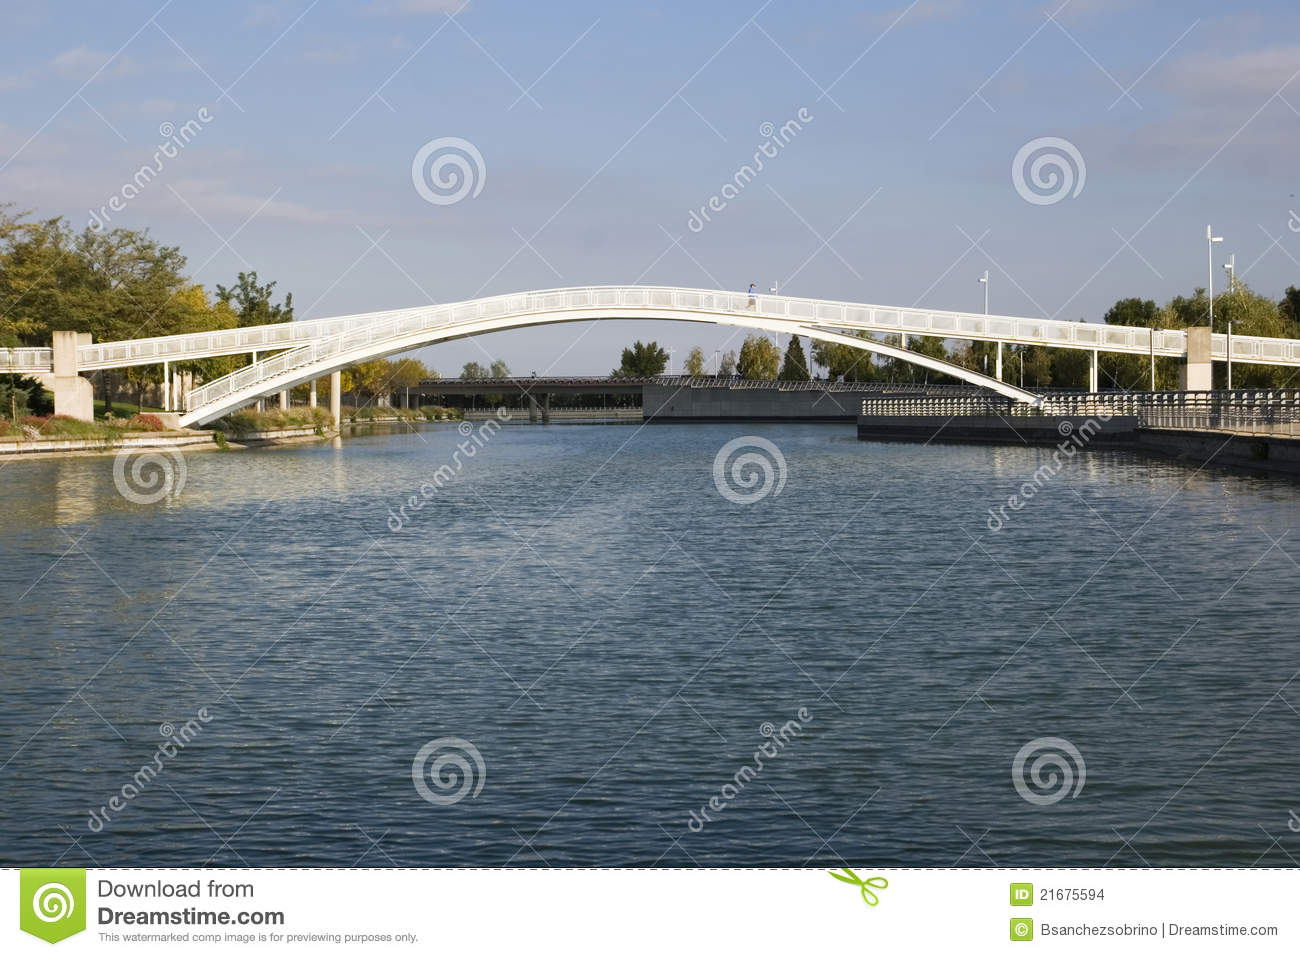 More Similar Stock Images Of   Bridge Over Water